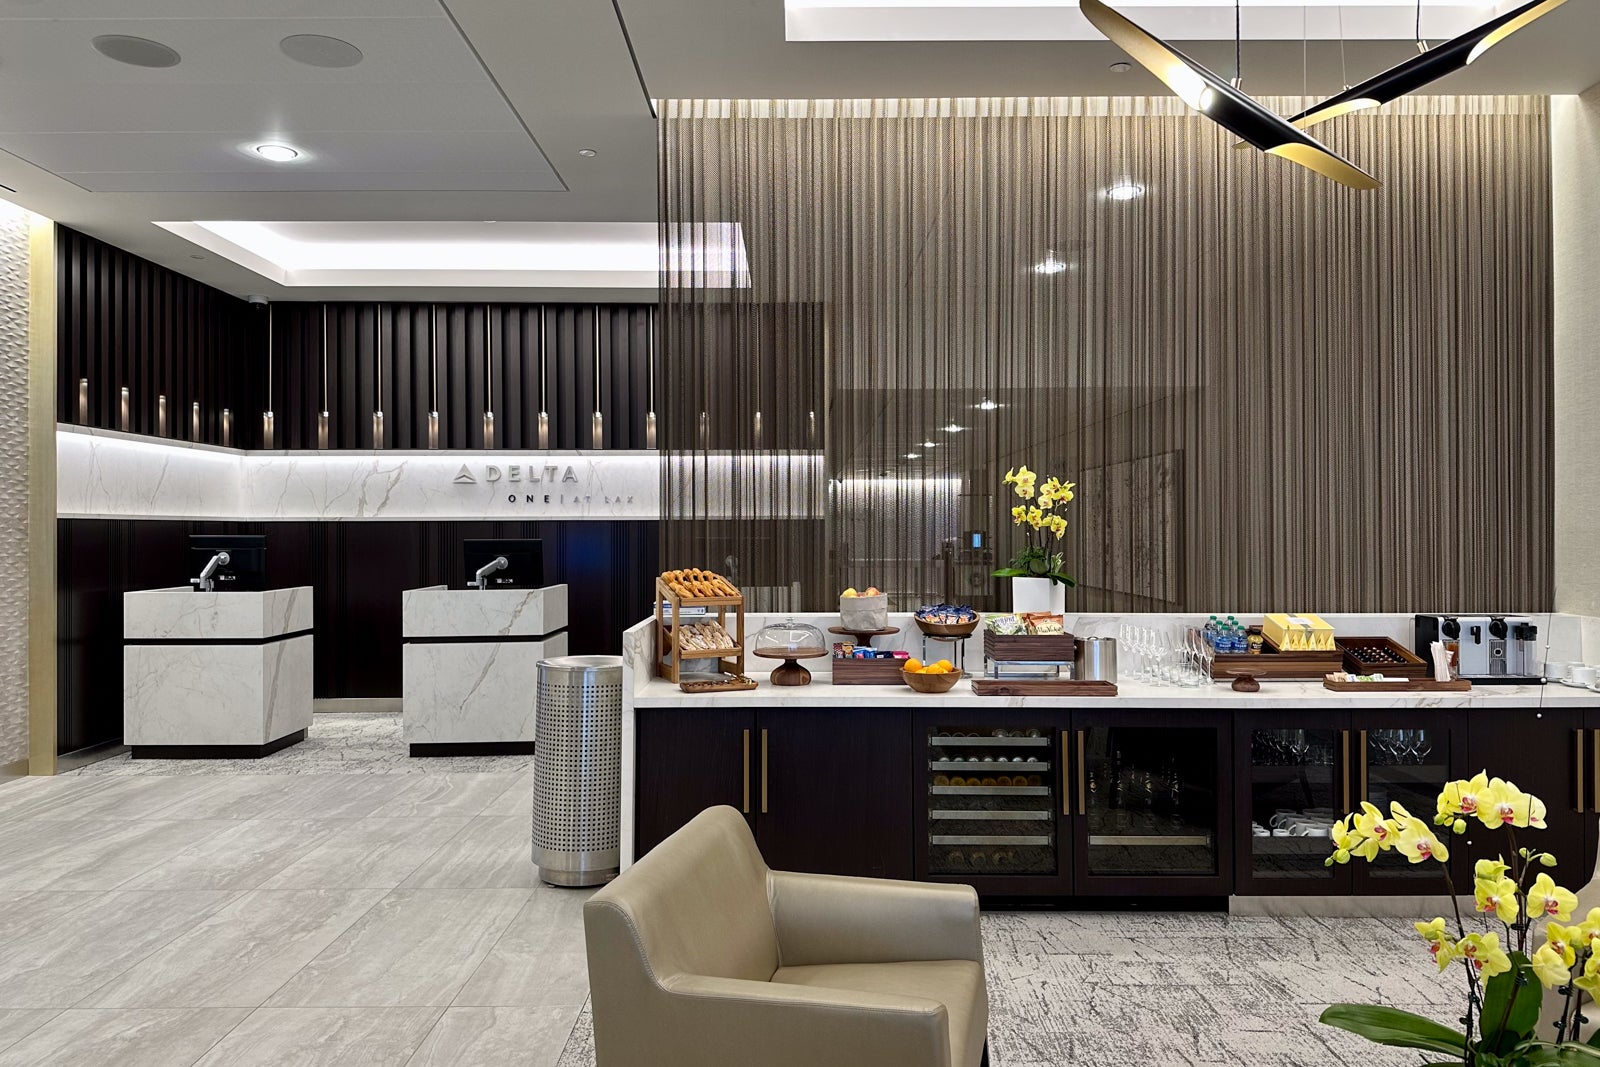 Delta One Check-in Lounge LAX